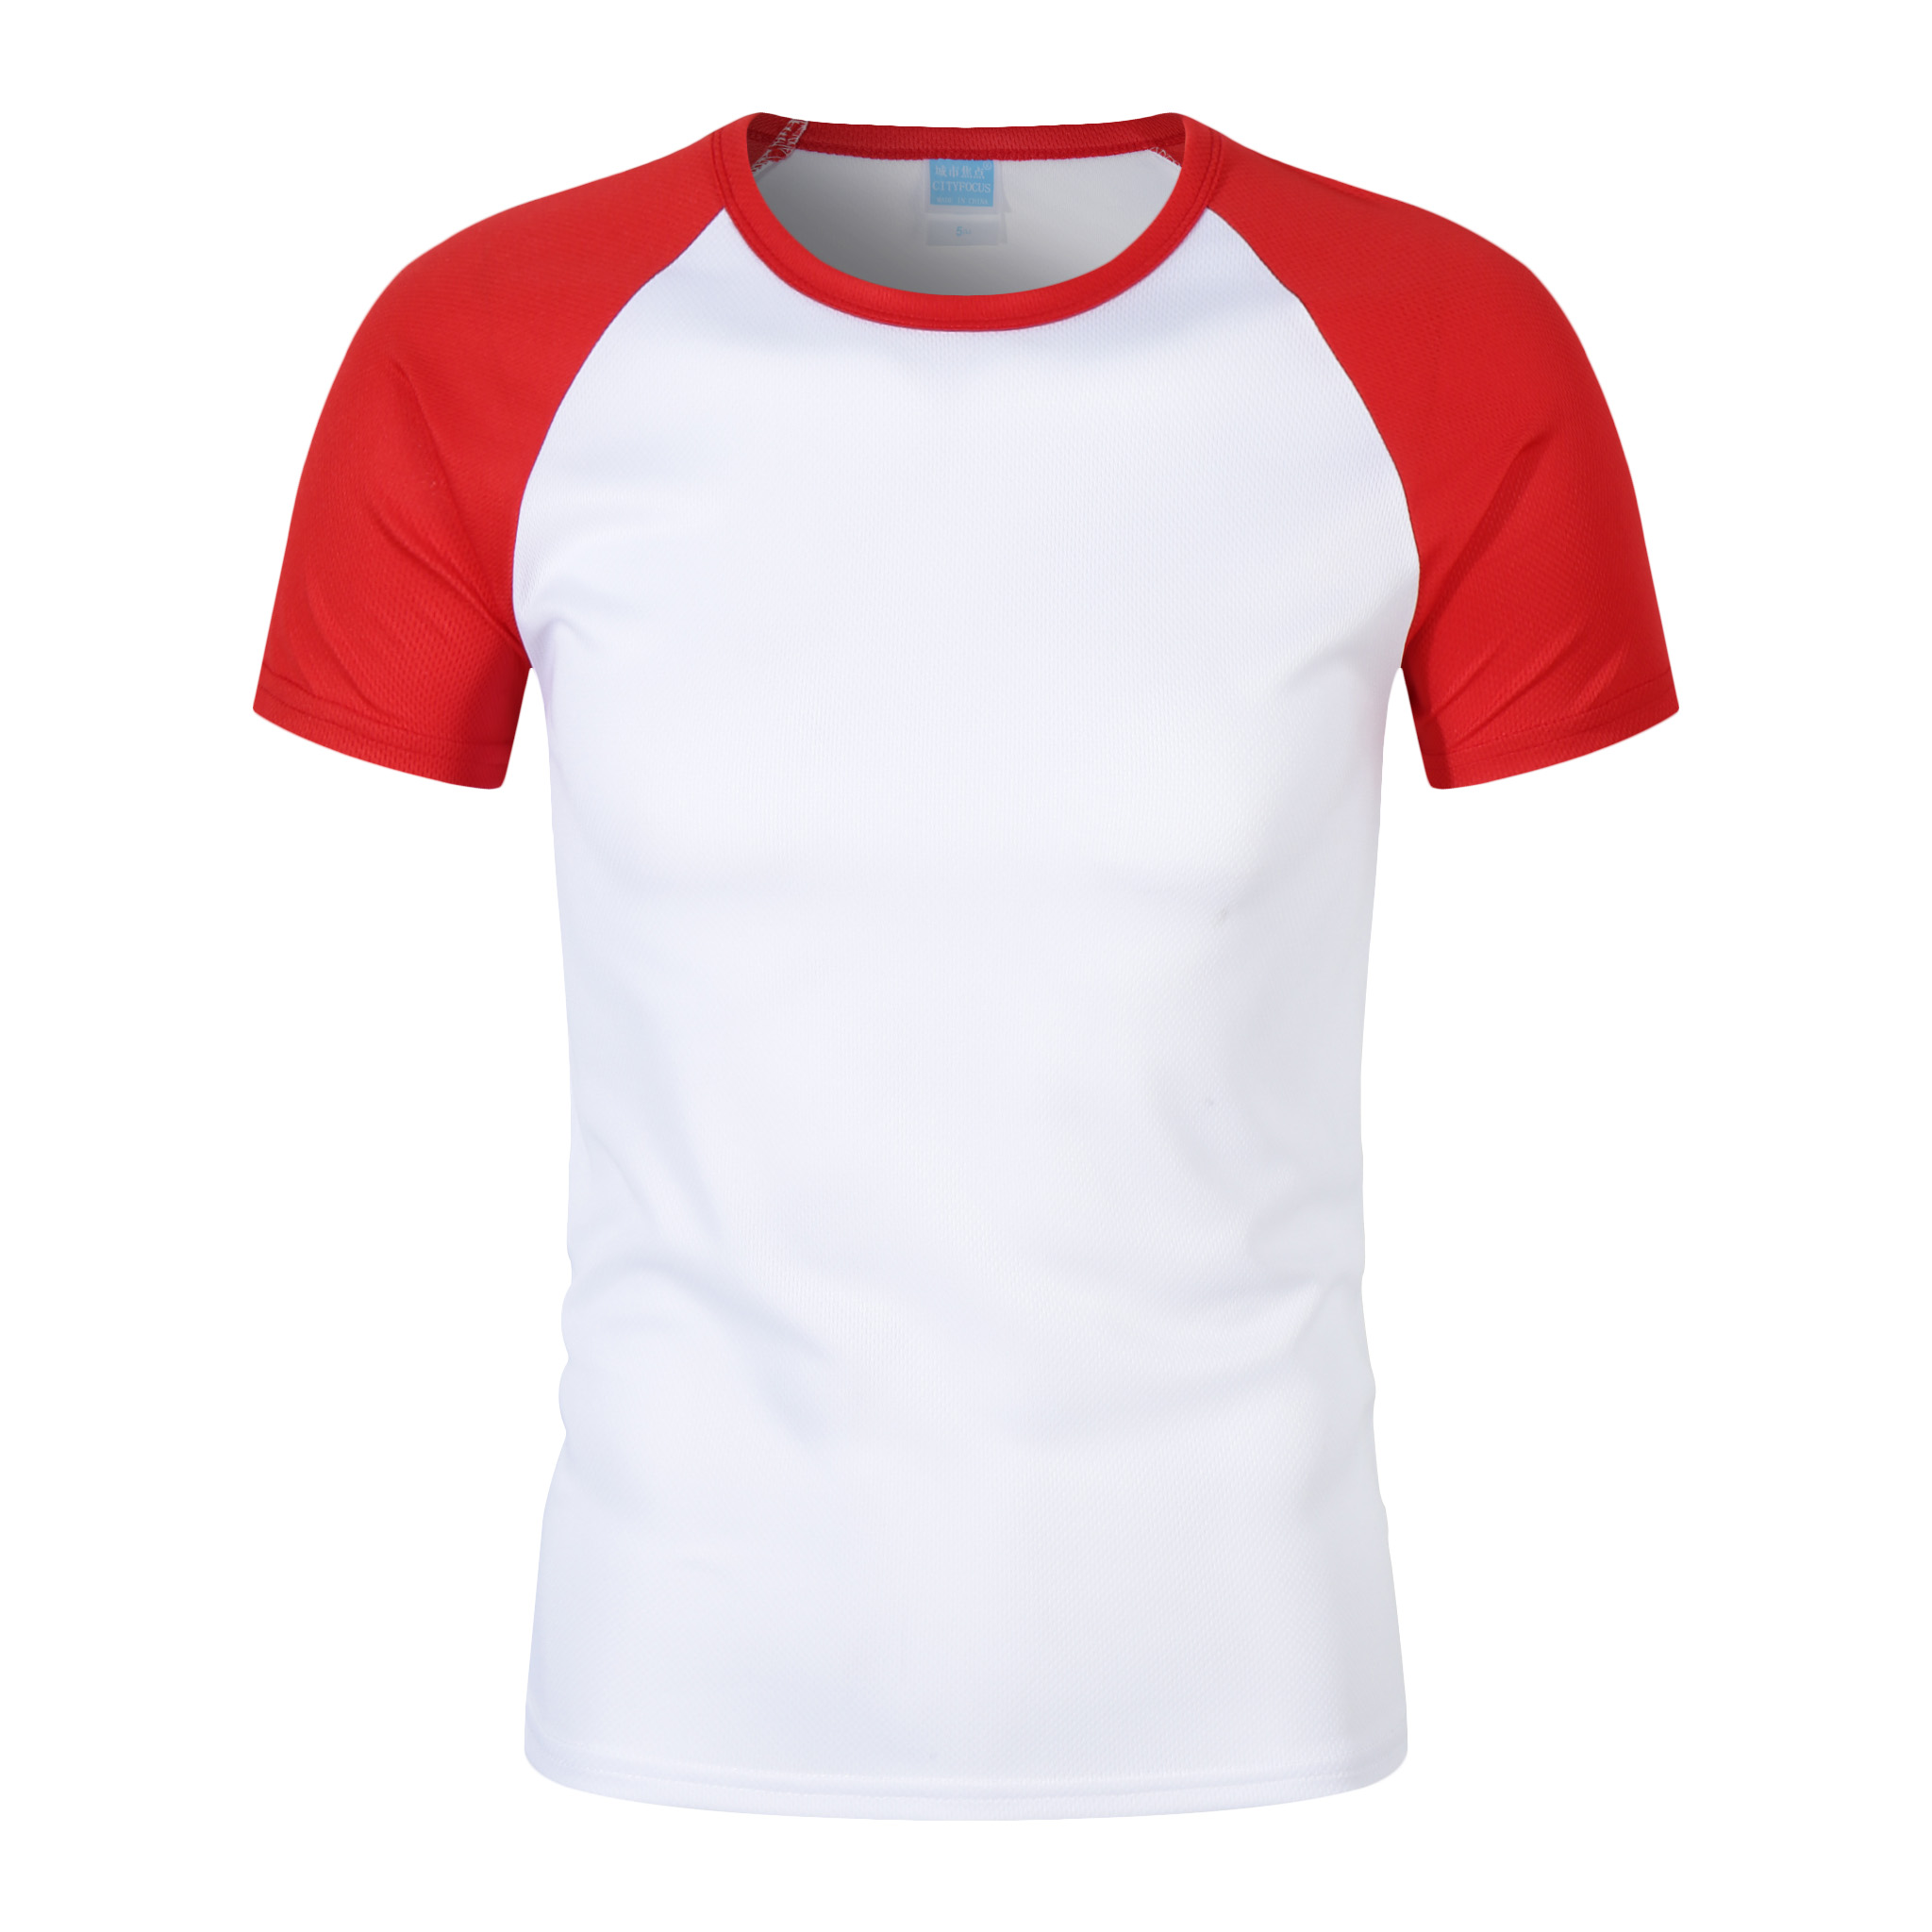 Special Price for Clothes Online - High Quality Raglan sleeve round neck short t-shirt – Gift